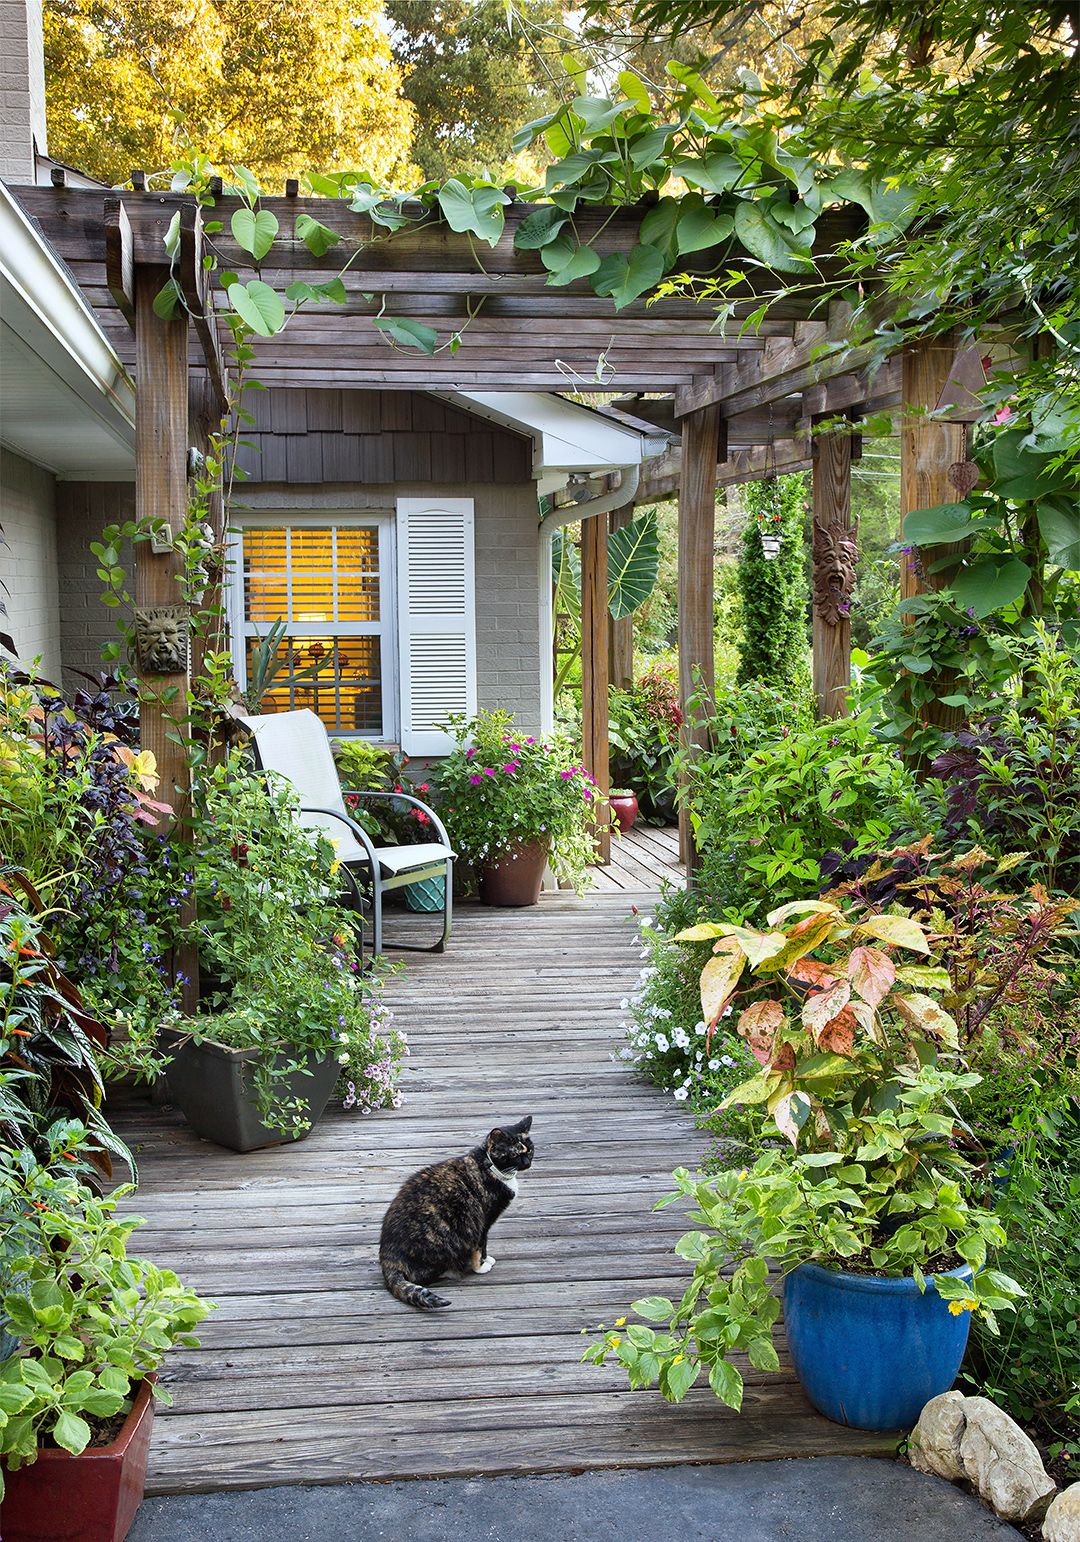 Transform Your Backyard with These Creative Landscaping Ideas